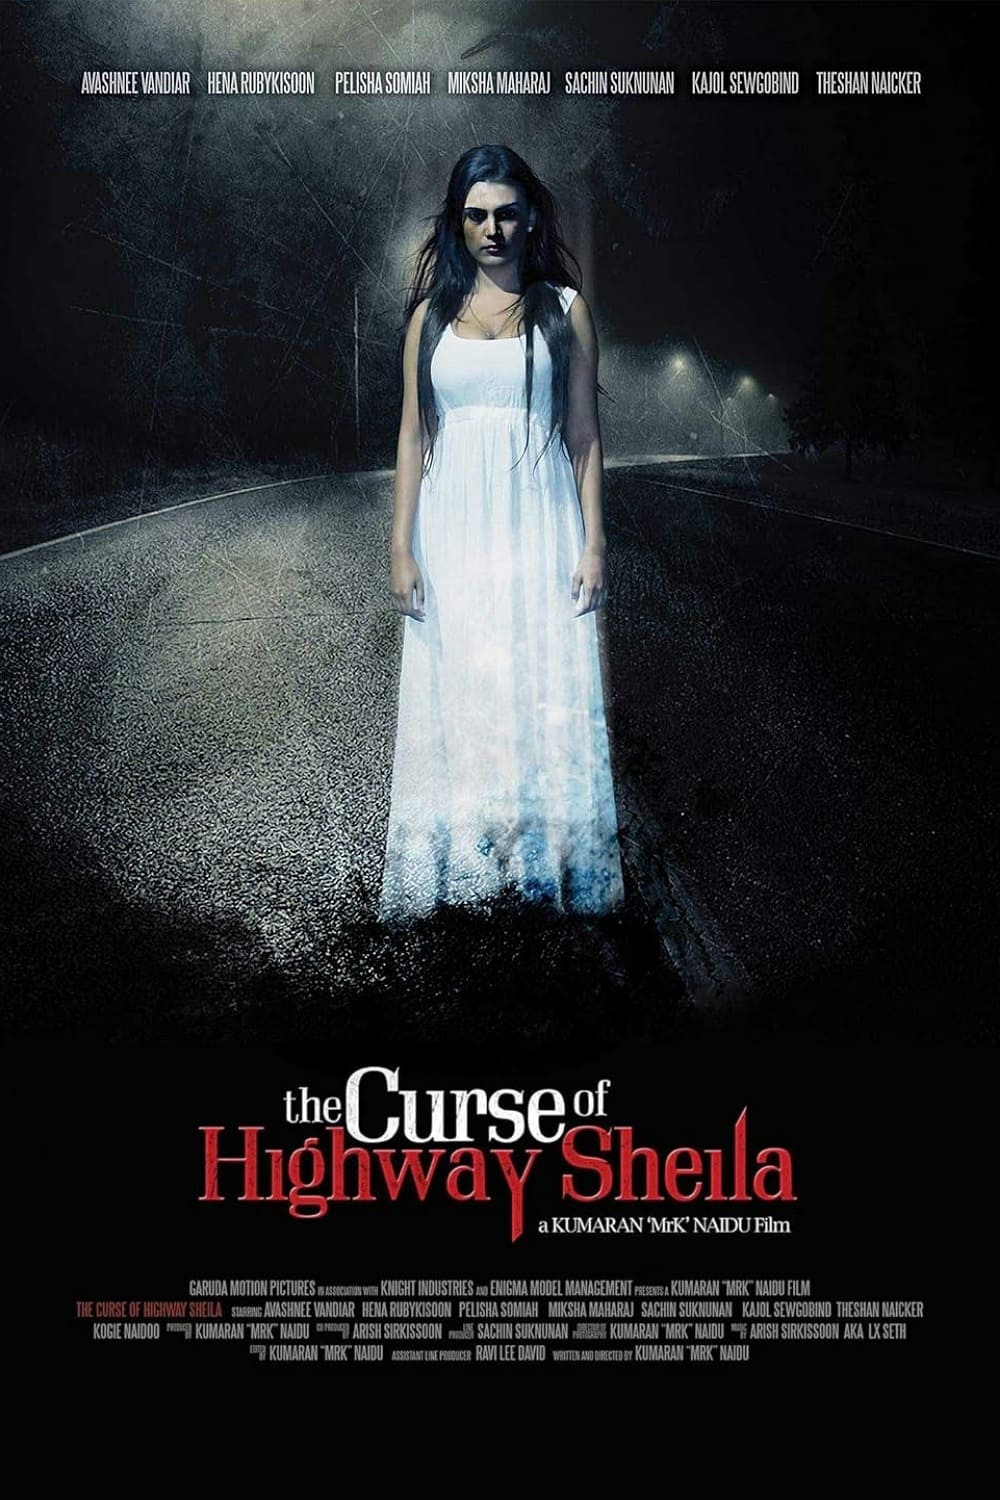 The Curse of Highway Sheila